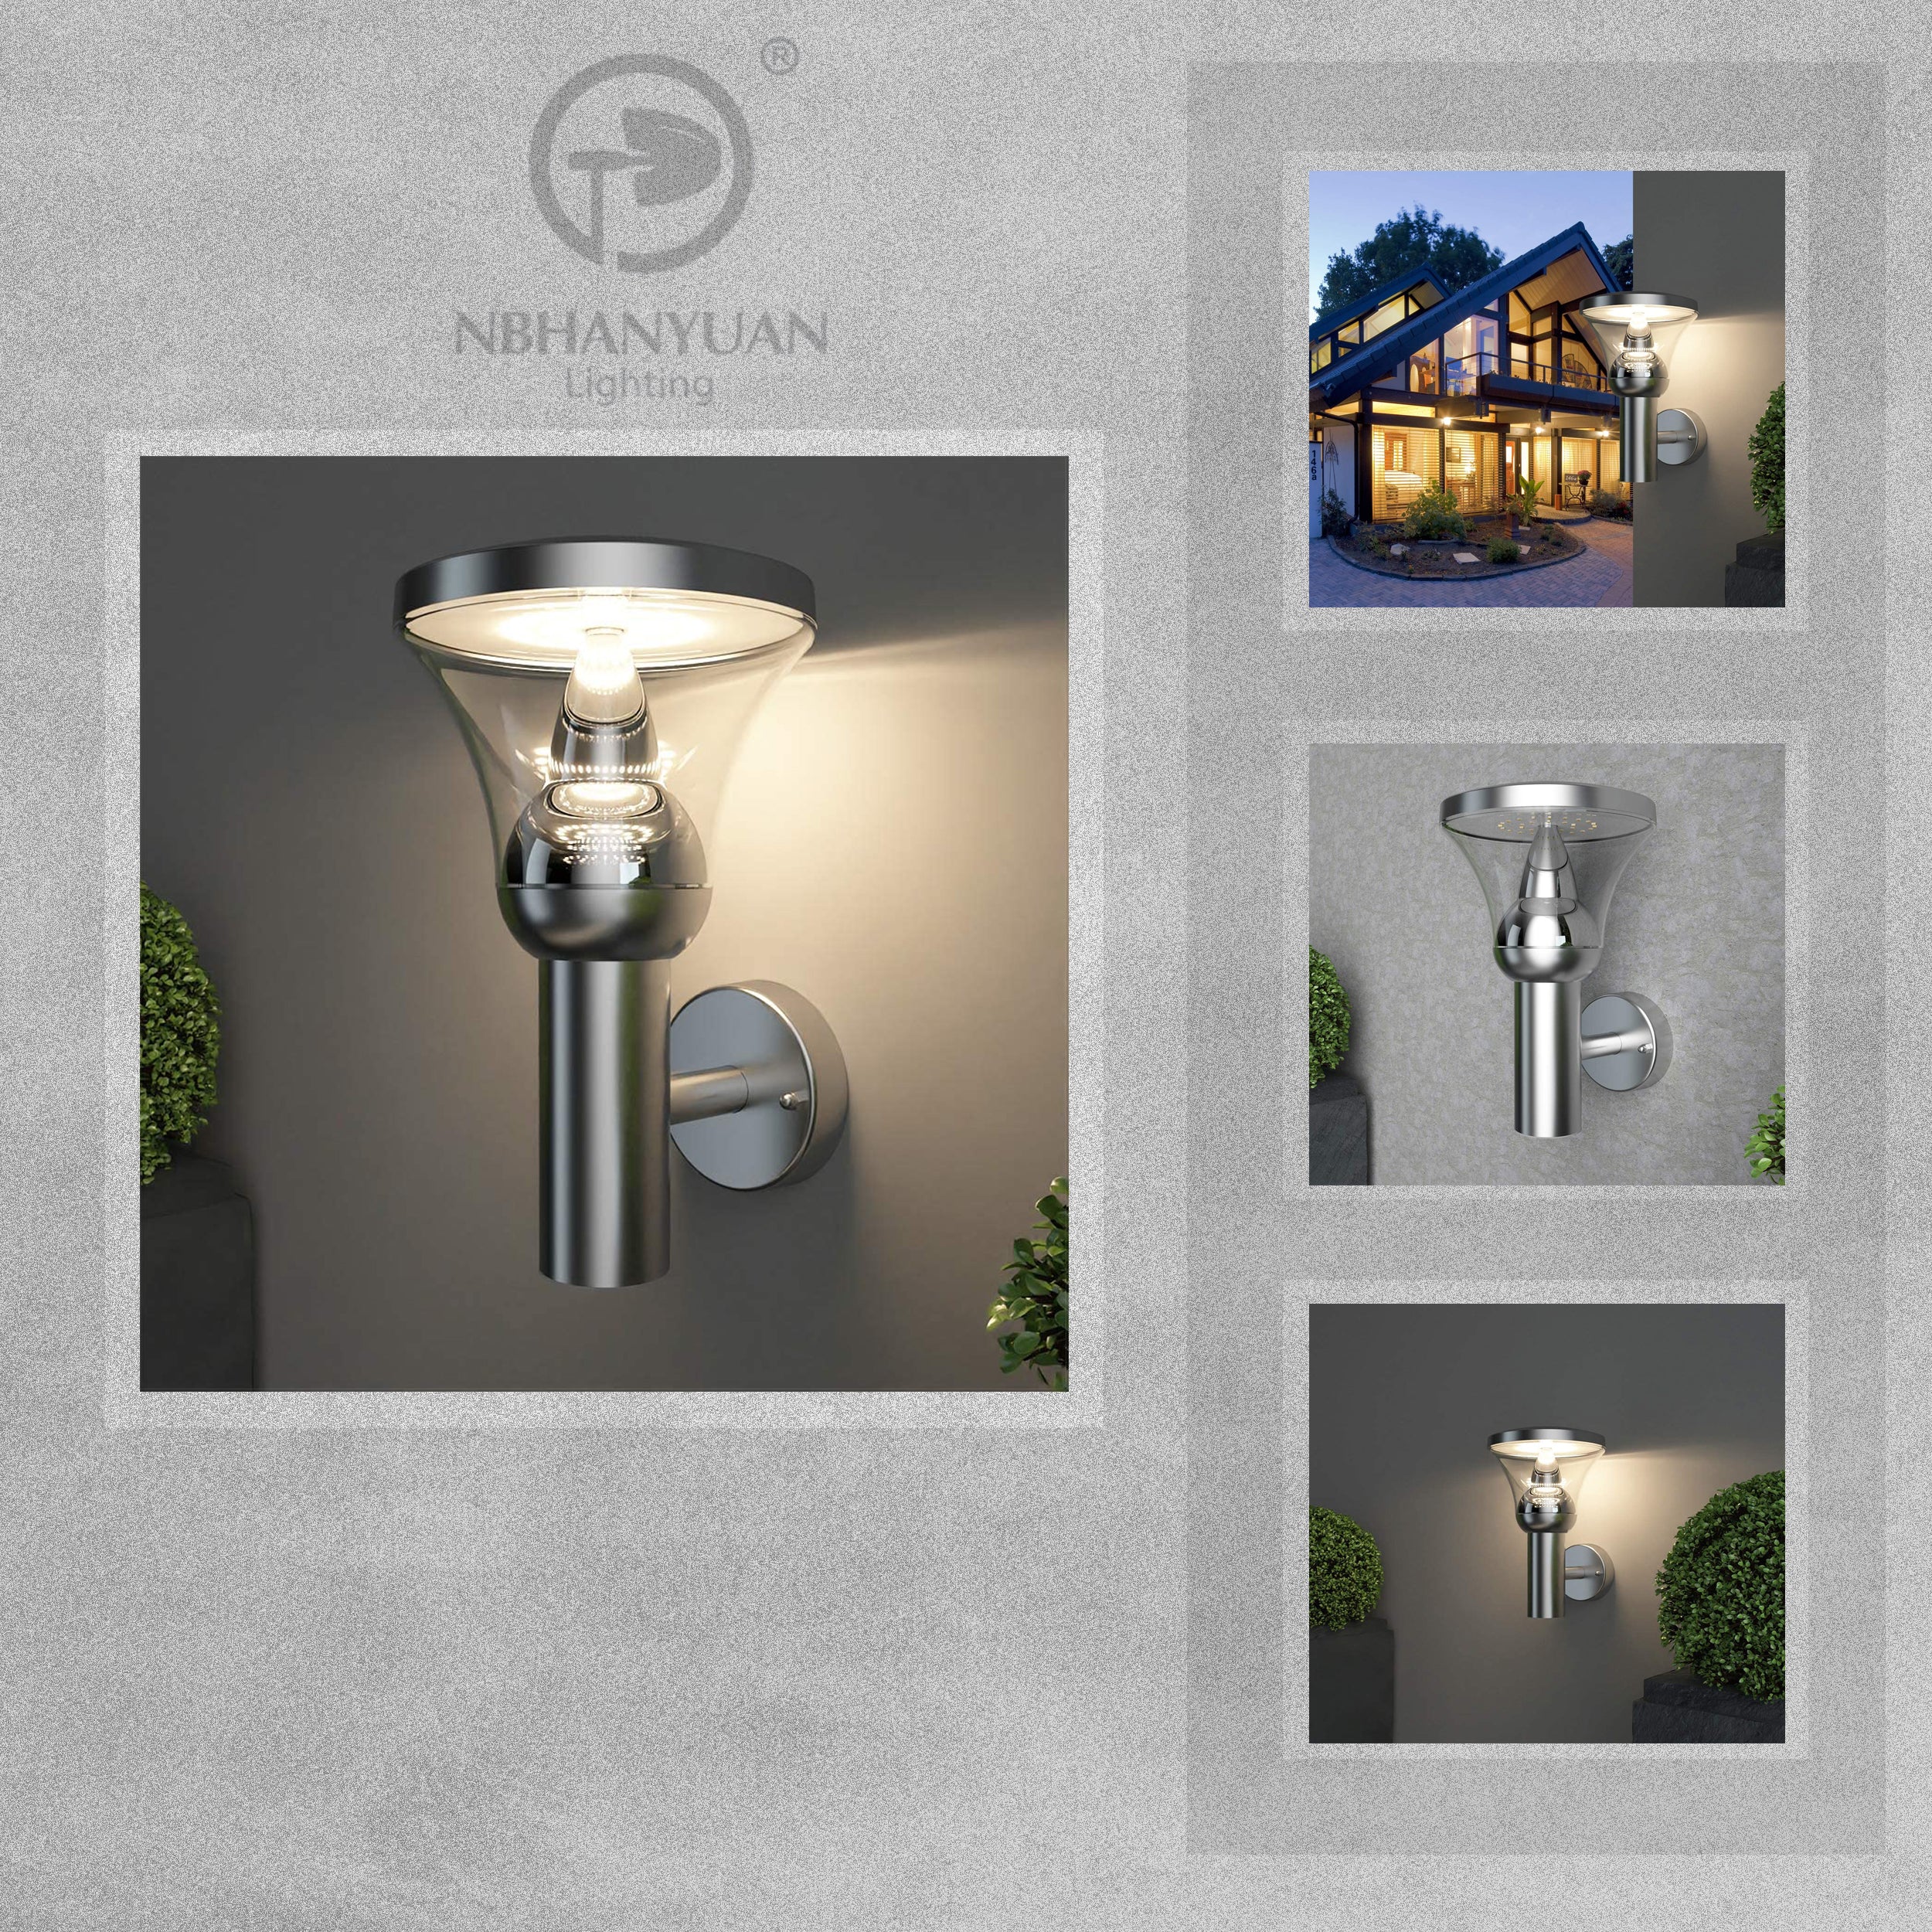 NBHANYUAN Lighting Nina Outdoor LED Wall Light - Brushed Stainless Steel